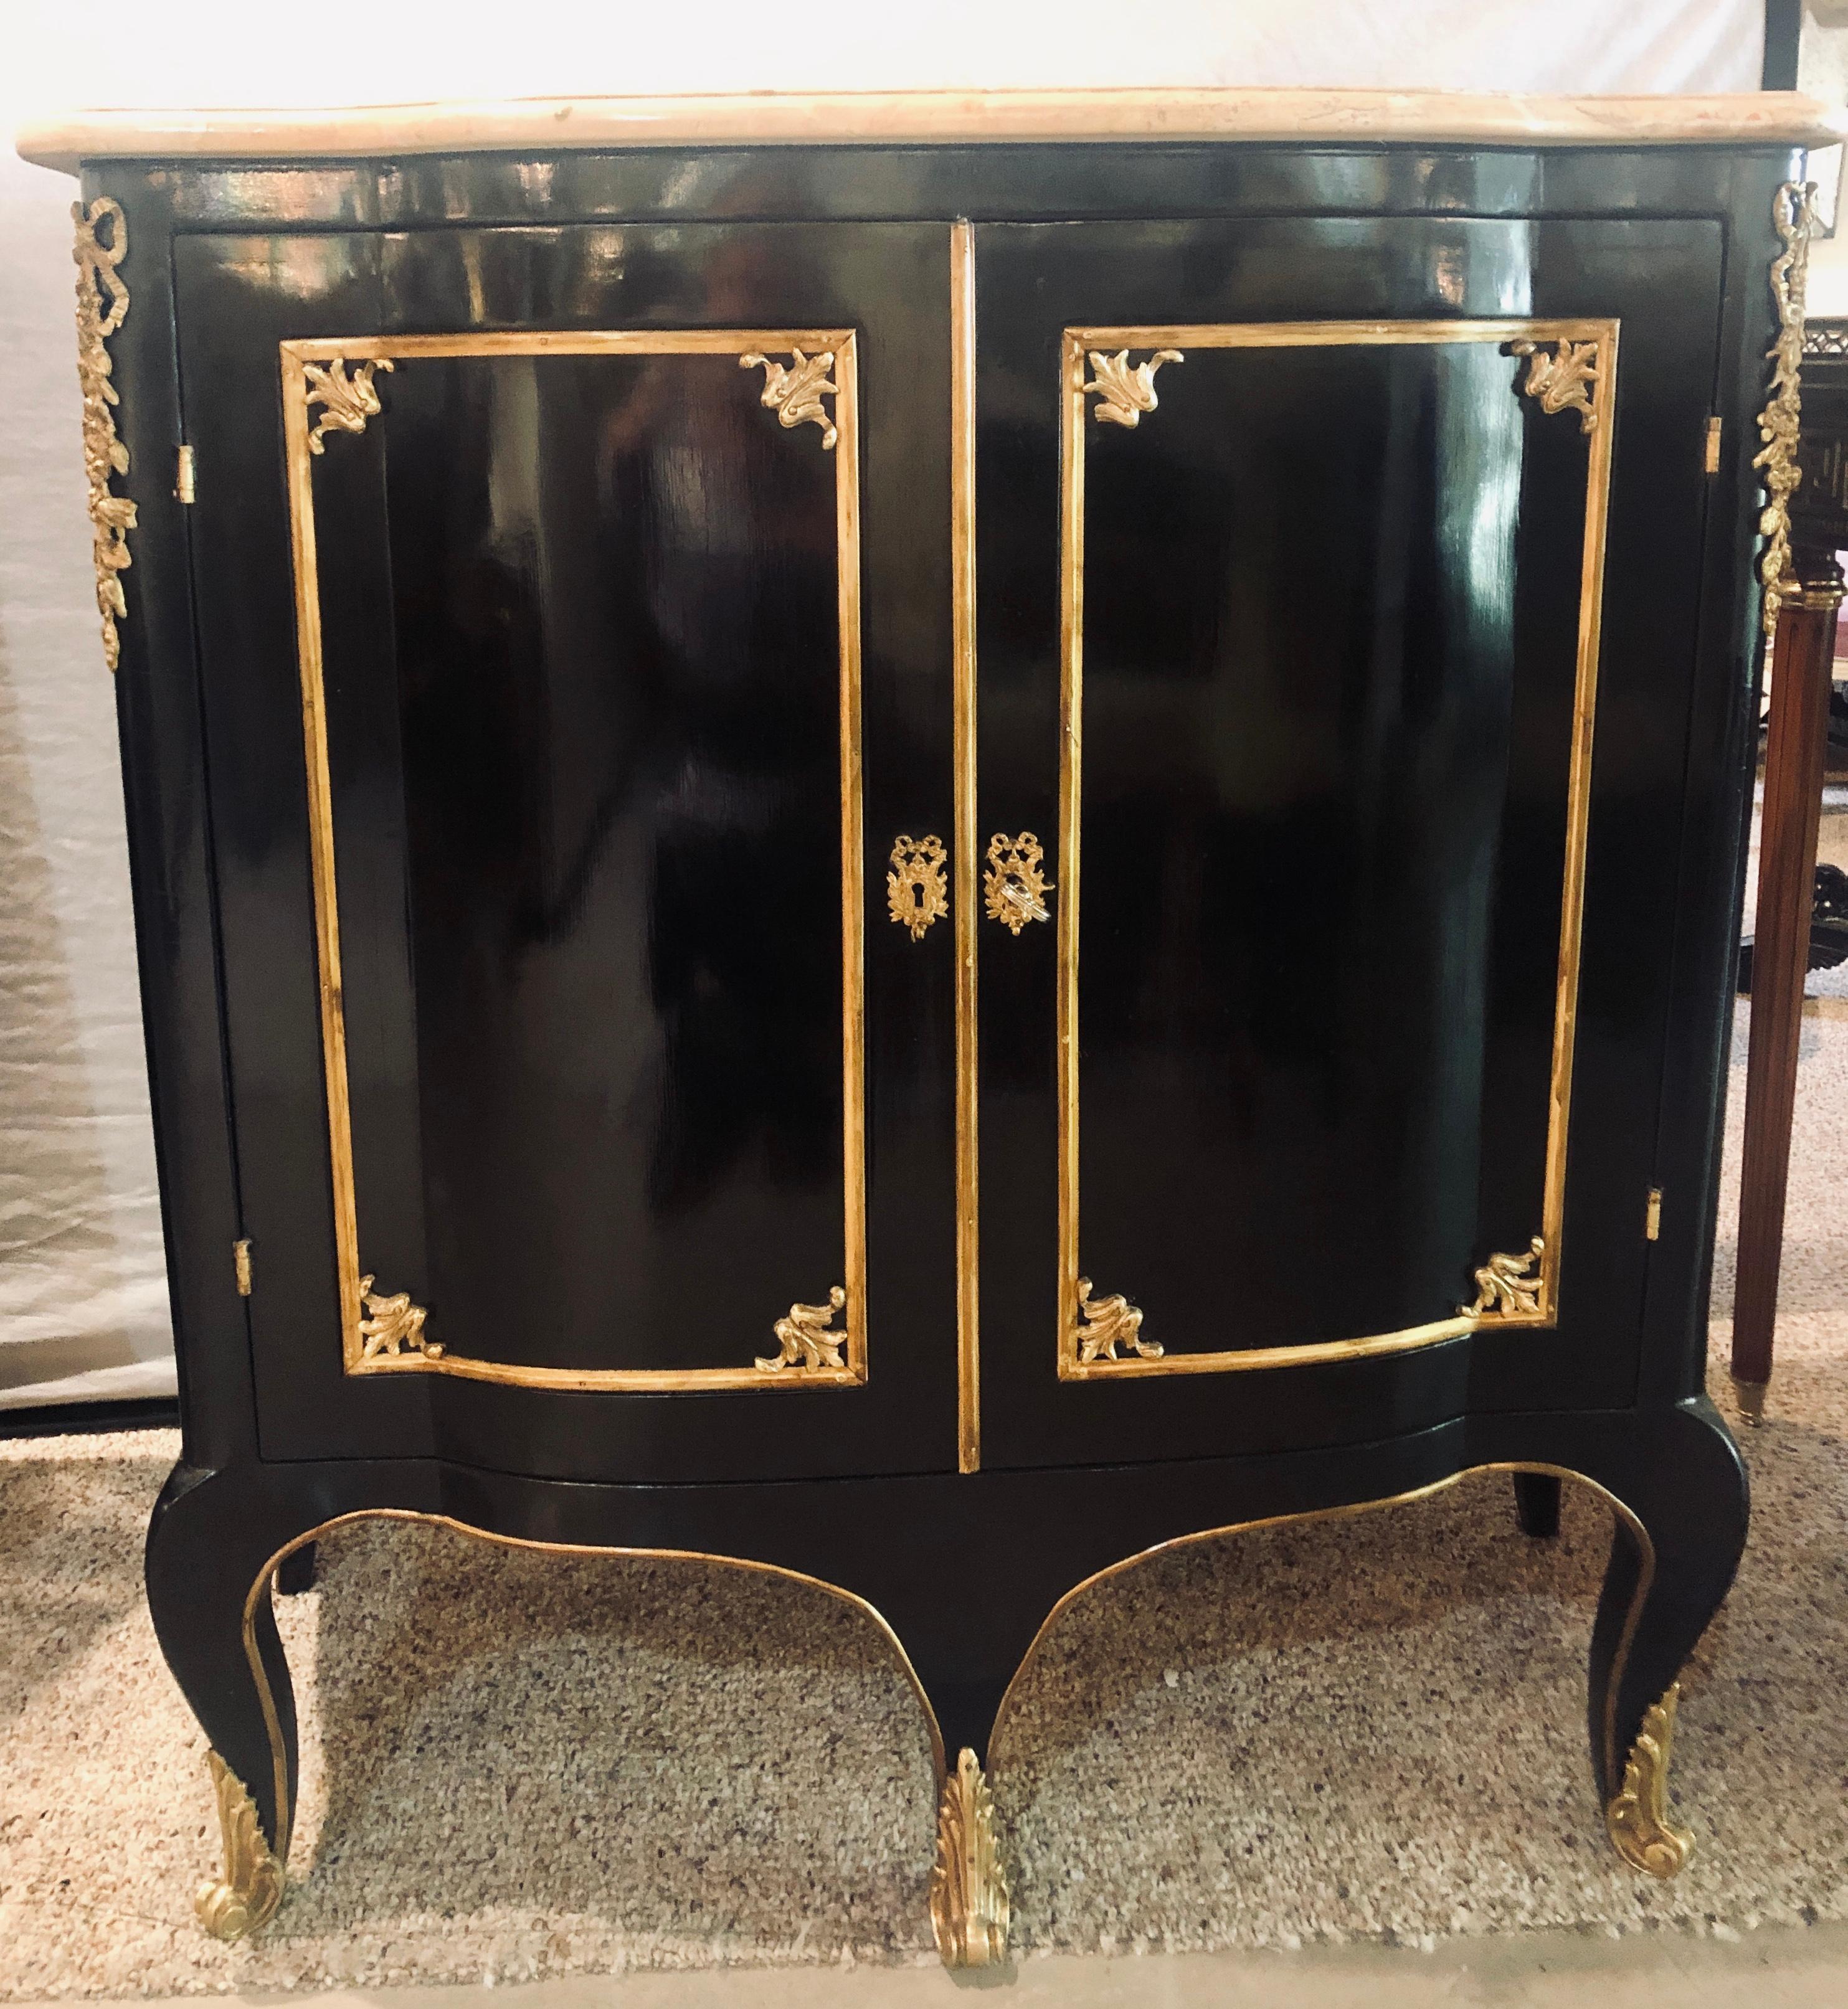 Maison Jansen Style, Hollywood Regency, Commodes, Black Lacquer, Marble, 1950s In Good Condition For Sale In Stamford, CT